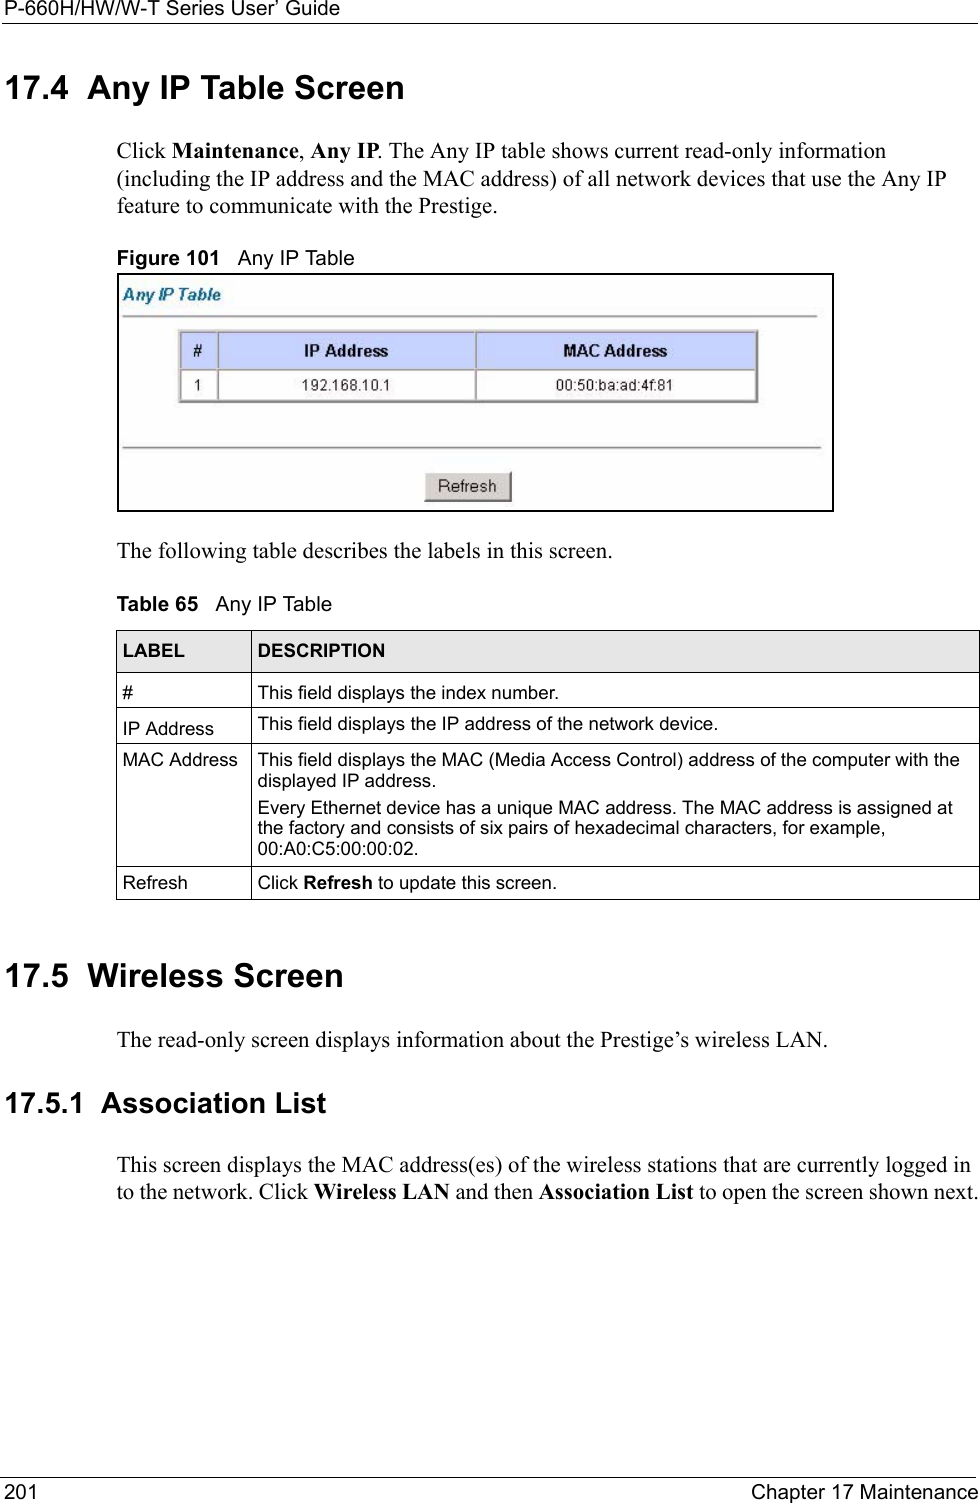 P-660H/HW/W-T Series User’ Guide201 Chapter 17 Maintenance17.4  Any IP Table Screen Click Maintenance, Any IP. The Any IP table shows current read-only information (including the IP address and the MAC address) of all network devices that use the Any IP feature to communicate with the Prestige. Figure 101   Any IP TableThe following table describes the labels in this screen.  17.5  Wireless Screen The read-only screen displays information about the Prestige’s wireless LAN.17.5.1  Association List This screen displays the MAC address(es) of the wireless stations that are currently logged in to the network. Click Wireless LAN and then Association List to open the screen shown next.Table 65   Any IP TableLABEL DESCRIPTION#This field displays the index number. IP Address This field displays the IP address of the network device. MAC Address This field displays the MAC (Media Access Control) address of the computer with the displayed IP address.Every Ethernet device has a unique MAC address. The MAC address is assigned at the factory and consists of six pairs of hexadecimal characters, for example, 00:A0:C5:00:00:02.Refresh Click Refresh to update this screen. 